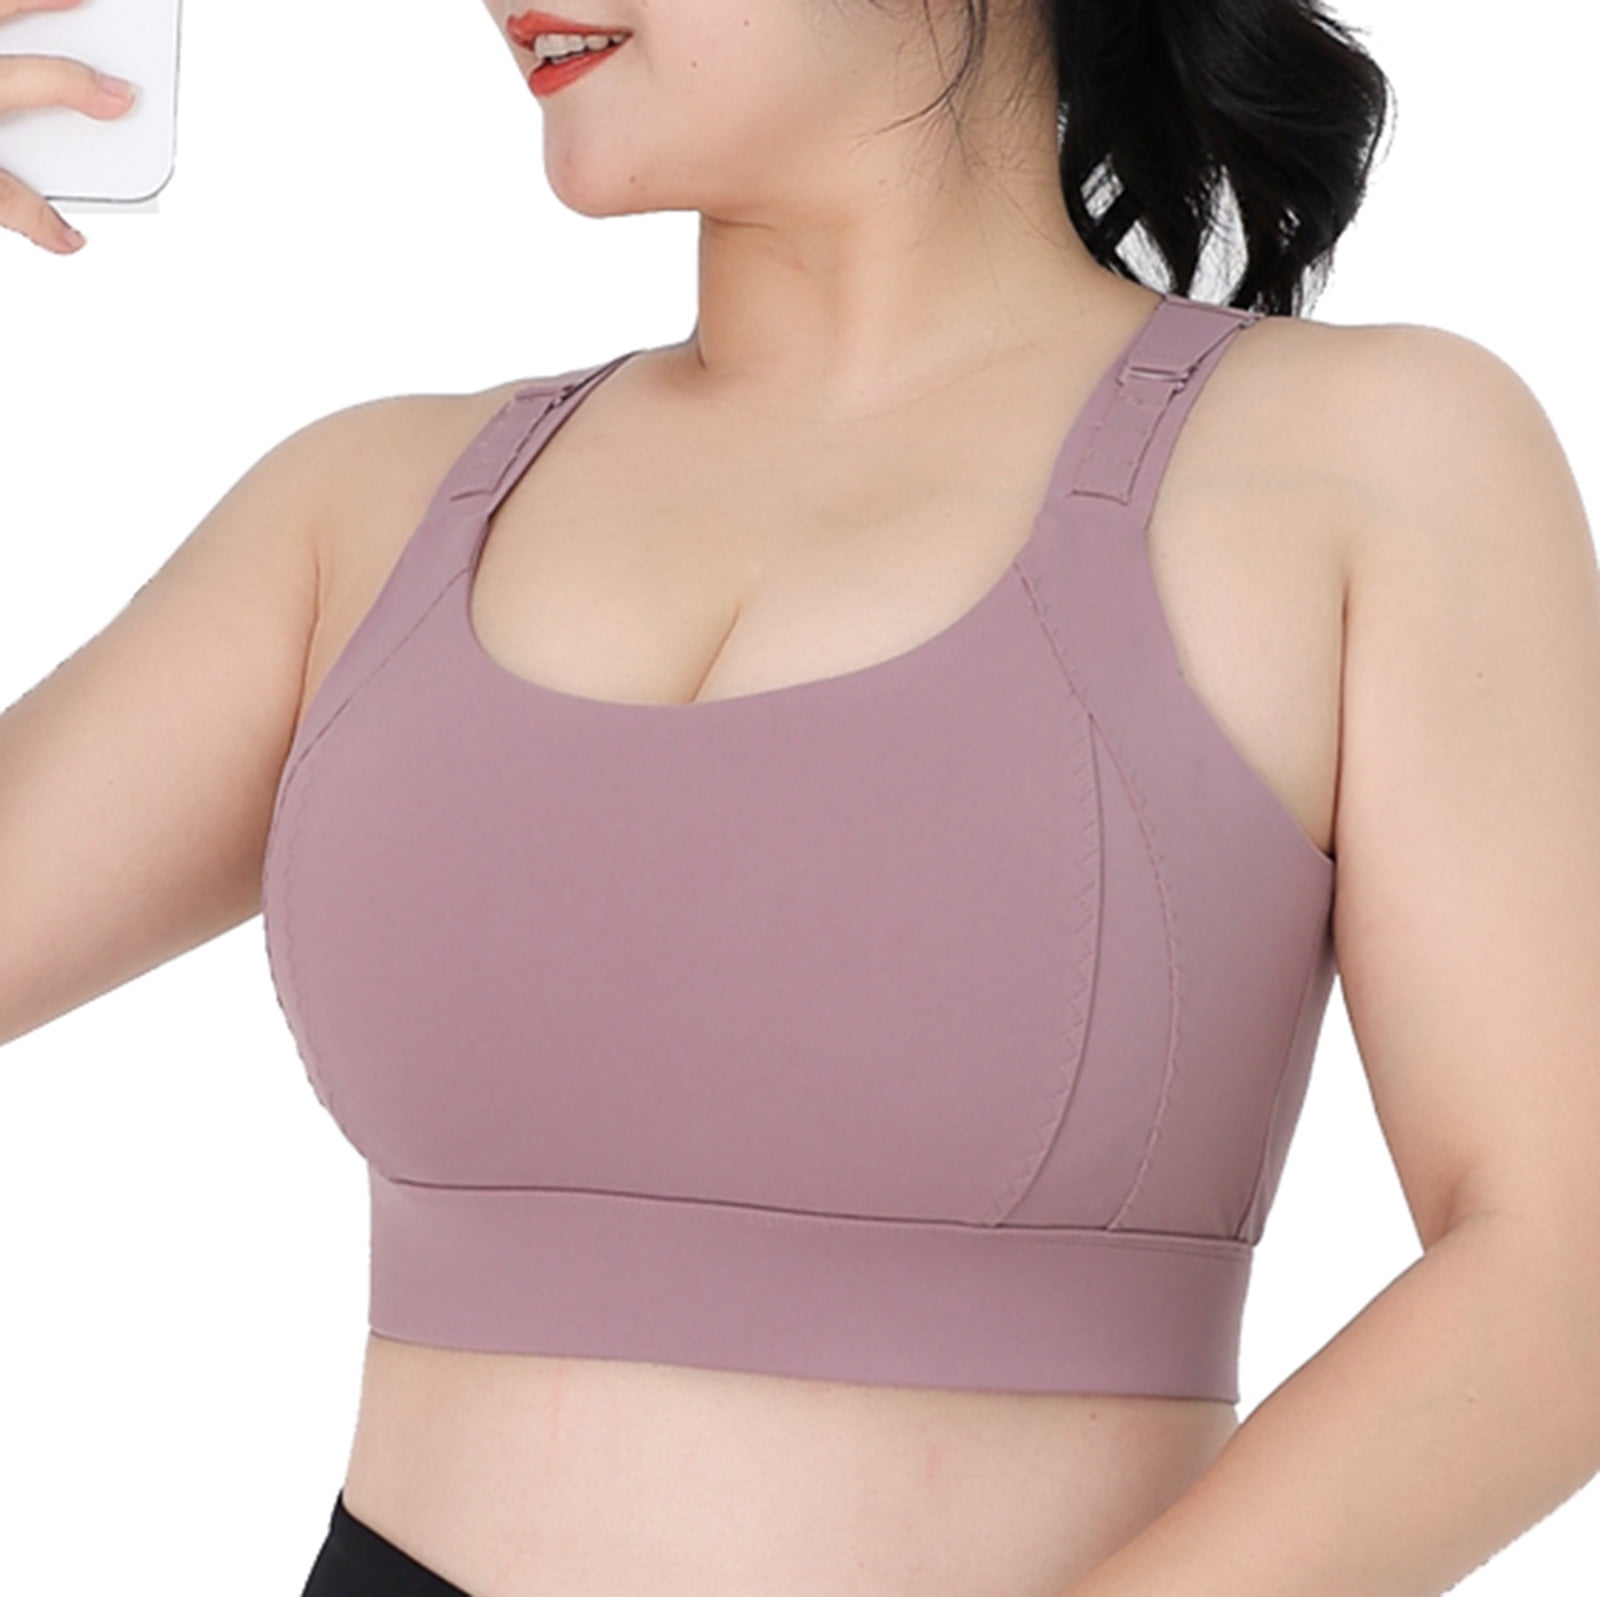 Aueoeo Girls Sports Bra, Bras for Large Breasted Women Woman's